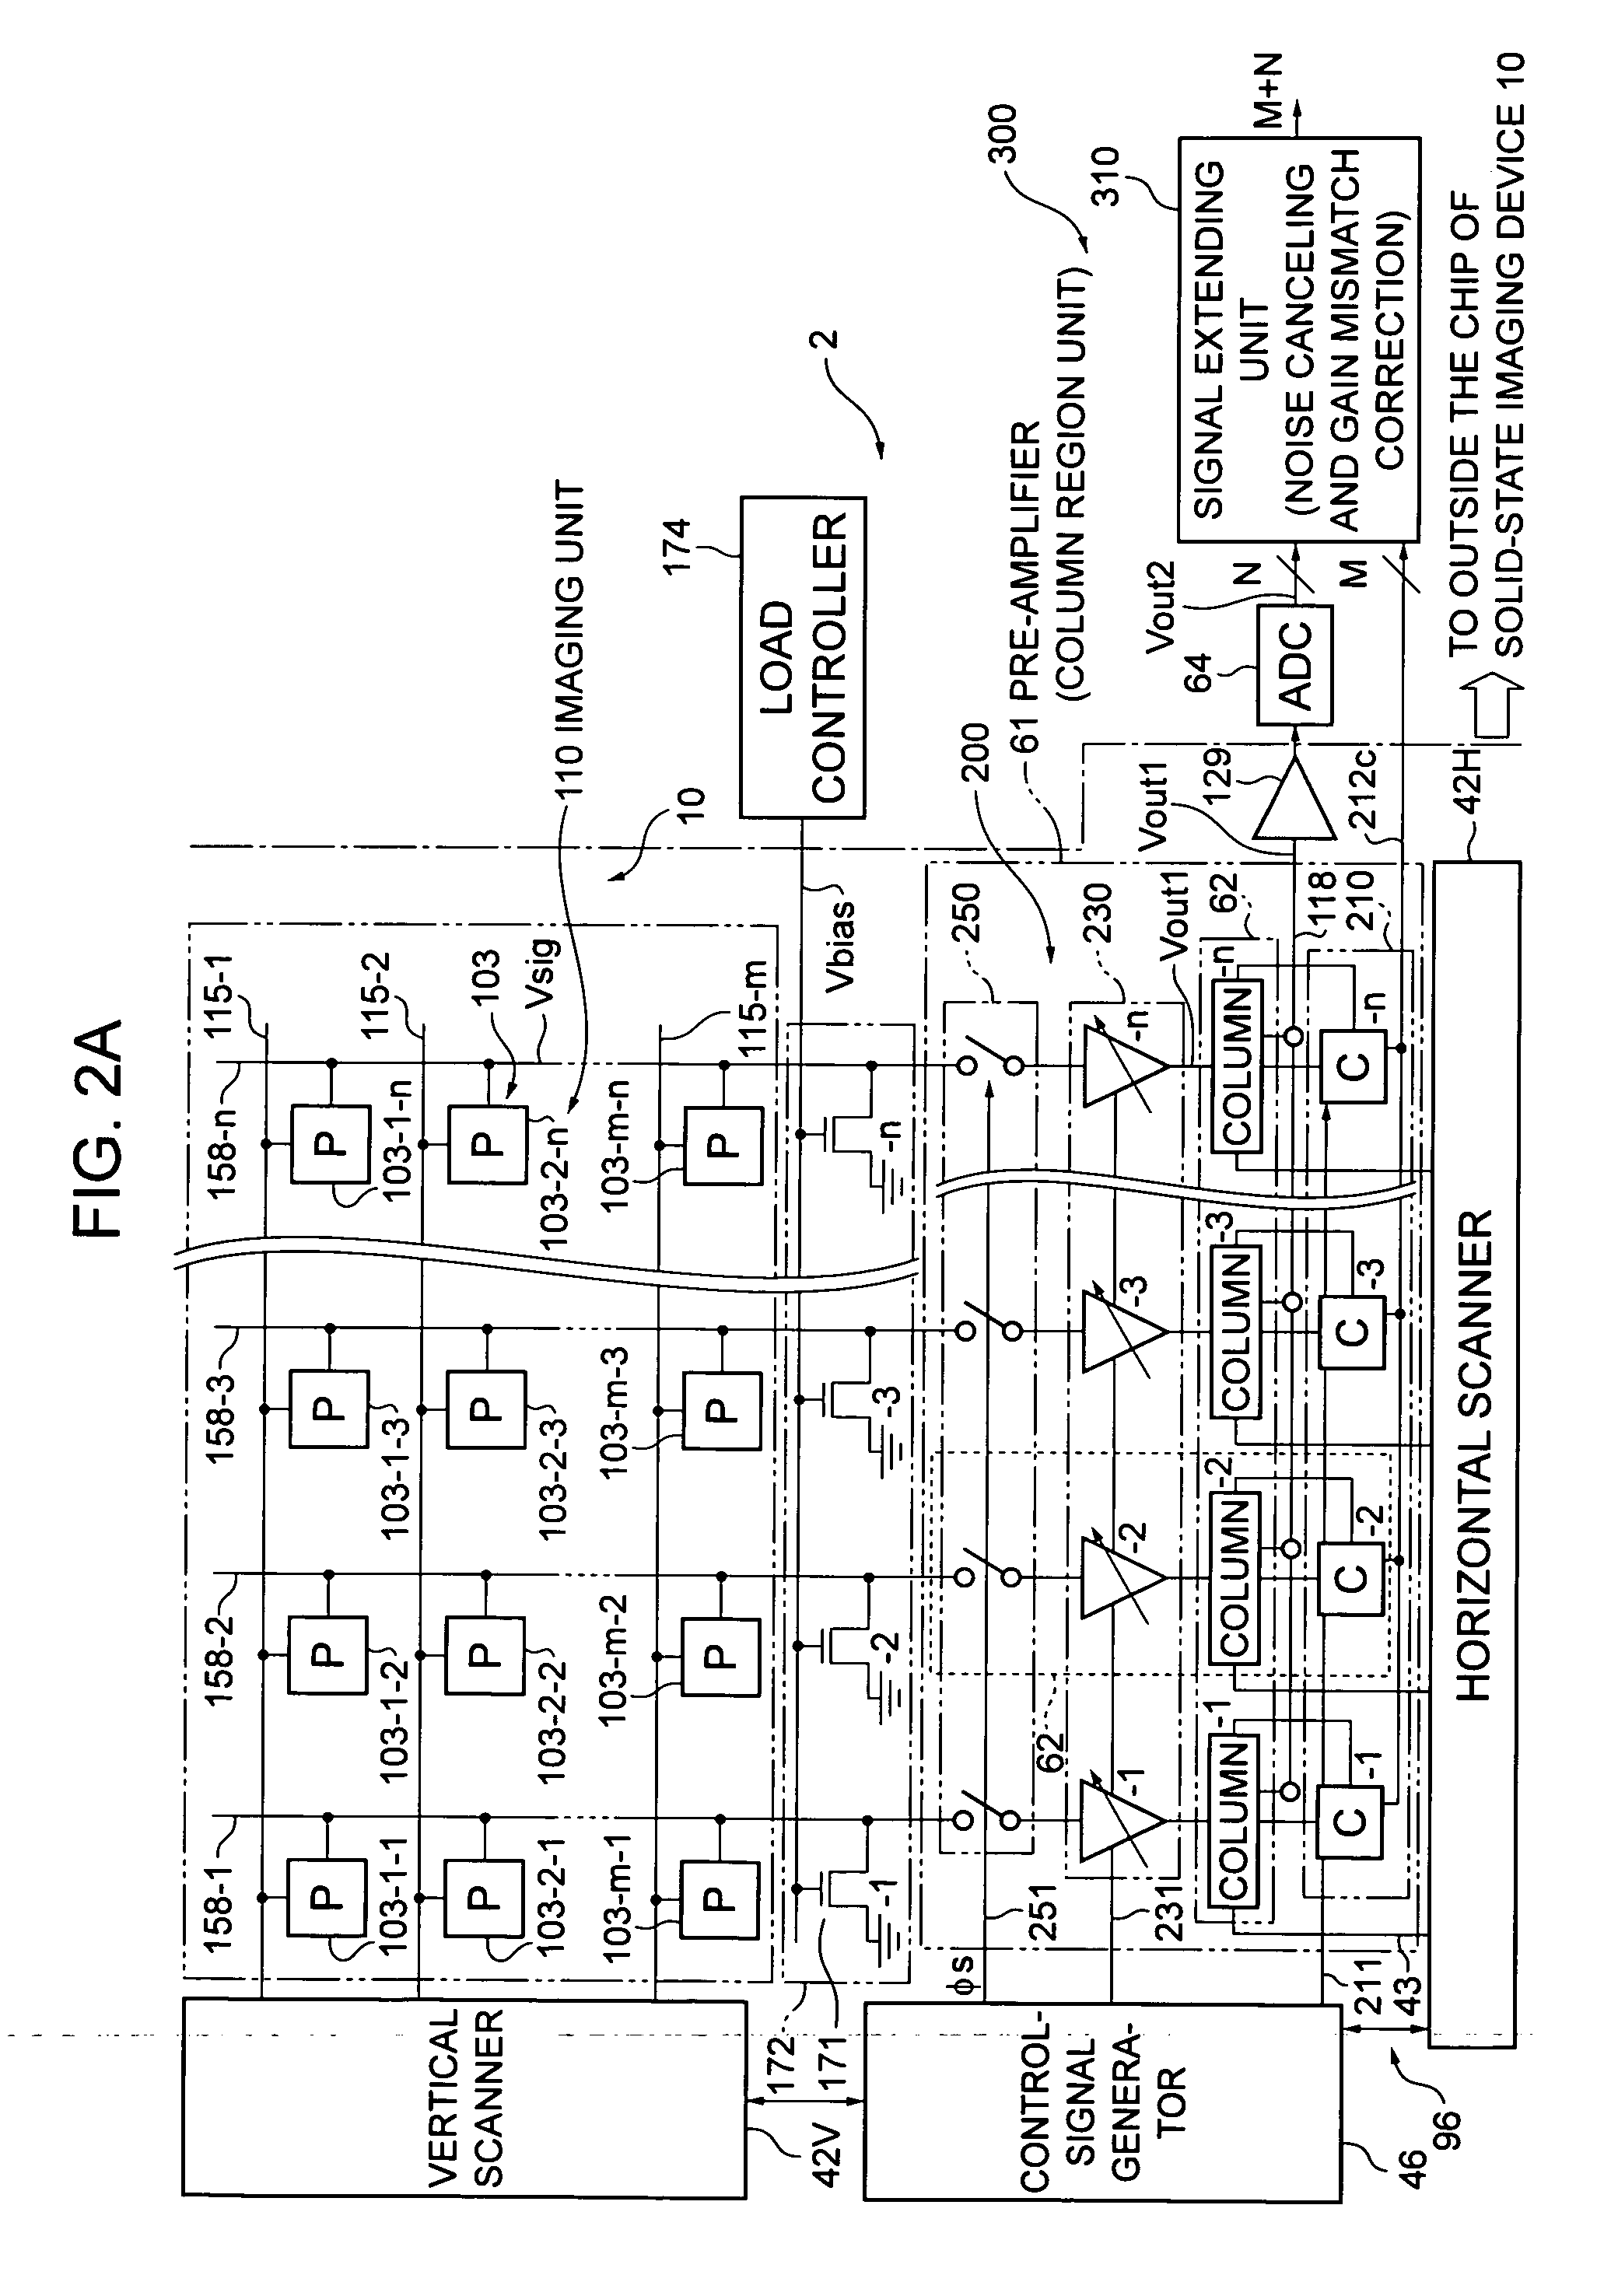 Method of controlling semiconductor device, signal processing method, semicondcutor device, and electronic apparatus